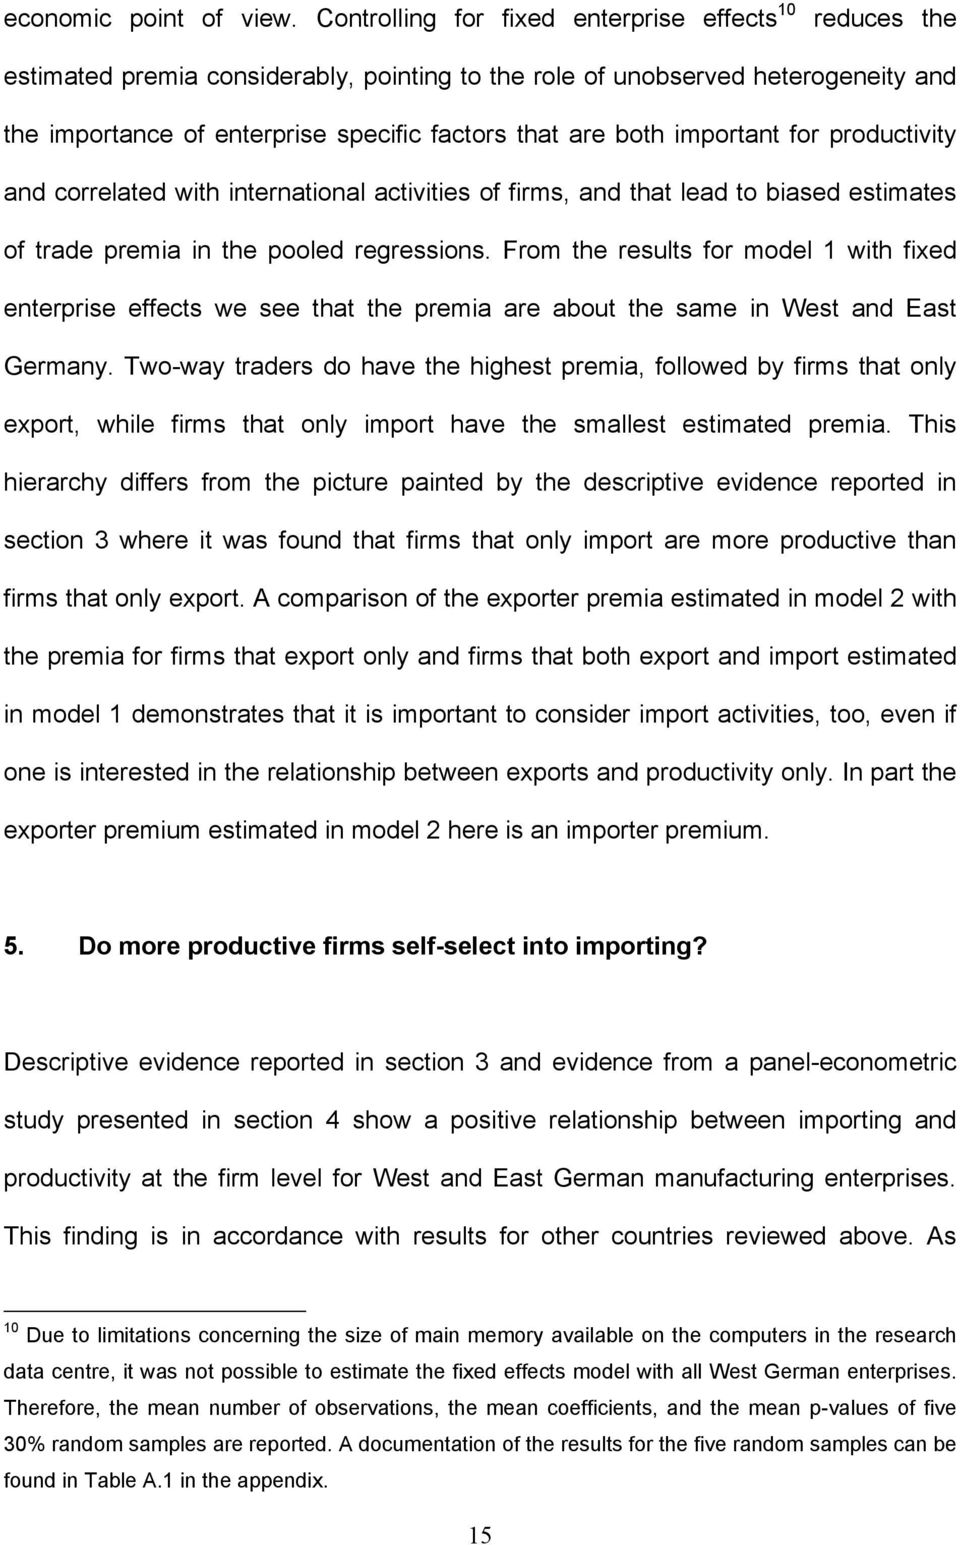 important for productivity and correlated with international activities of firms, and that lead to biased estimates of trade premia in the pooled regressions.